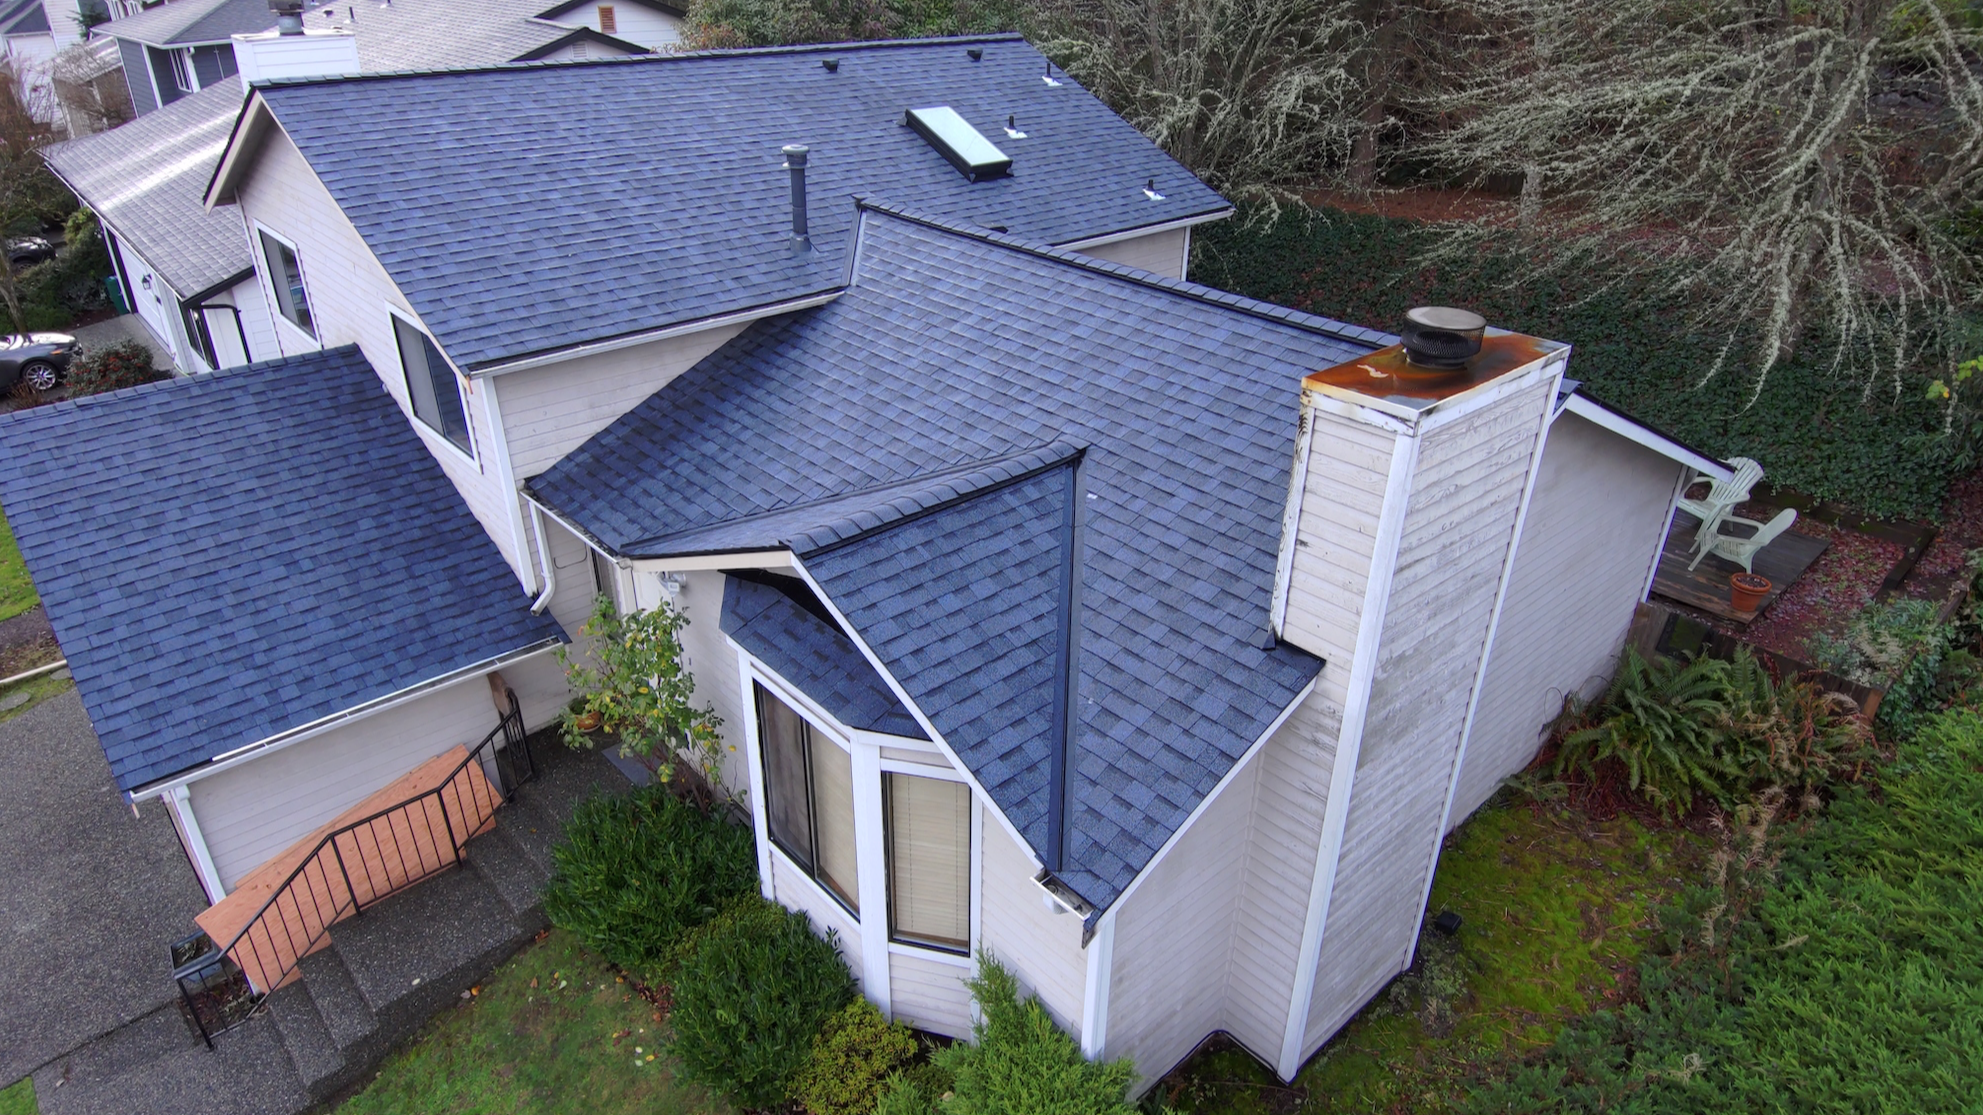 Brava Roof Tile Installation & Replacement From Renton's Top Residential Roofers